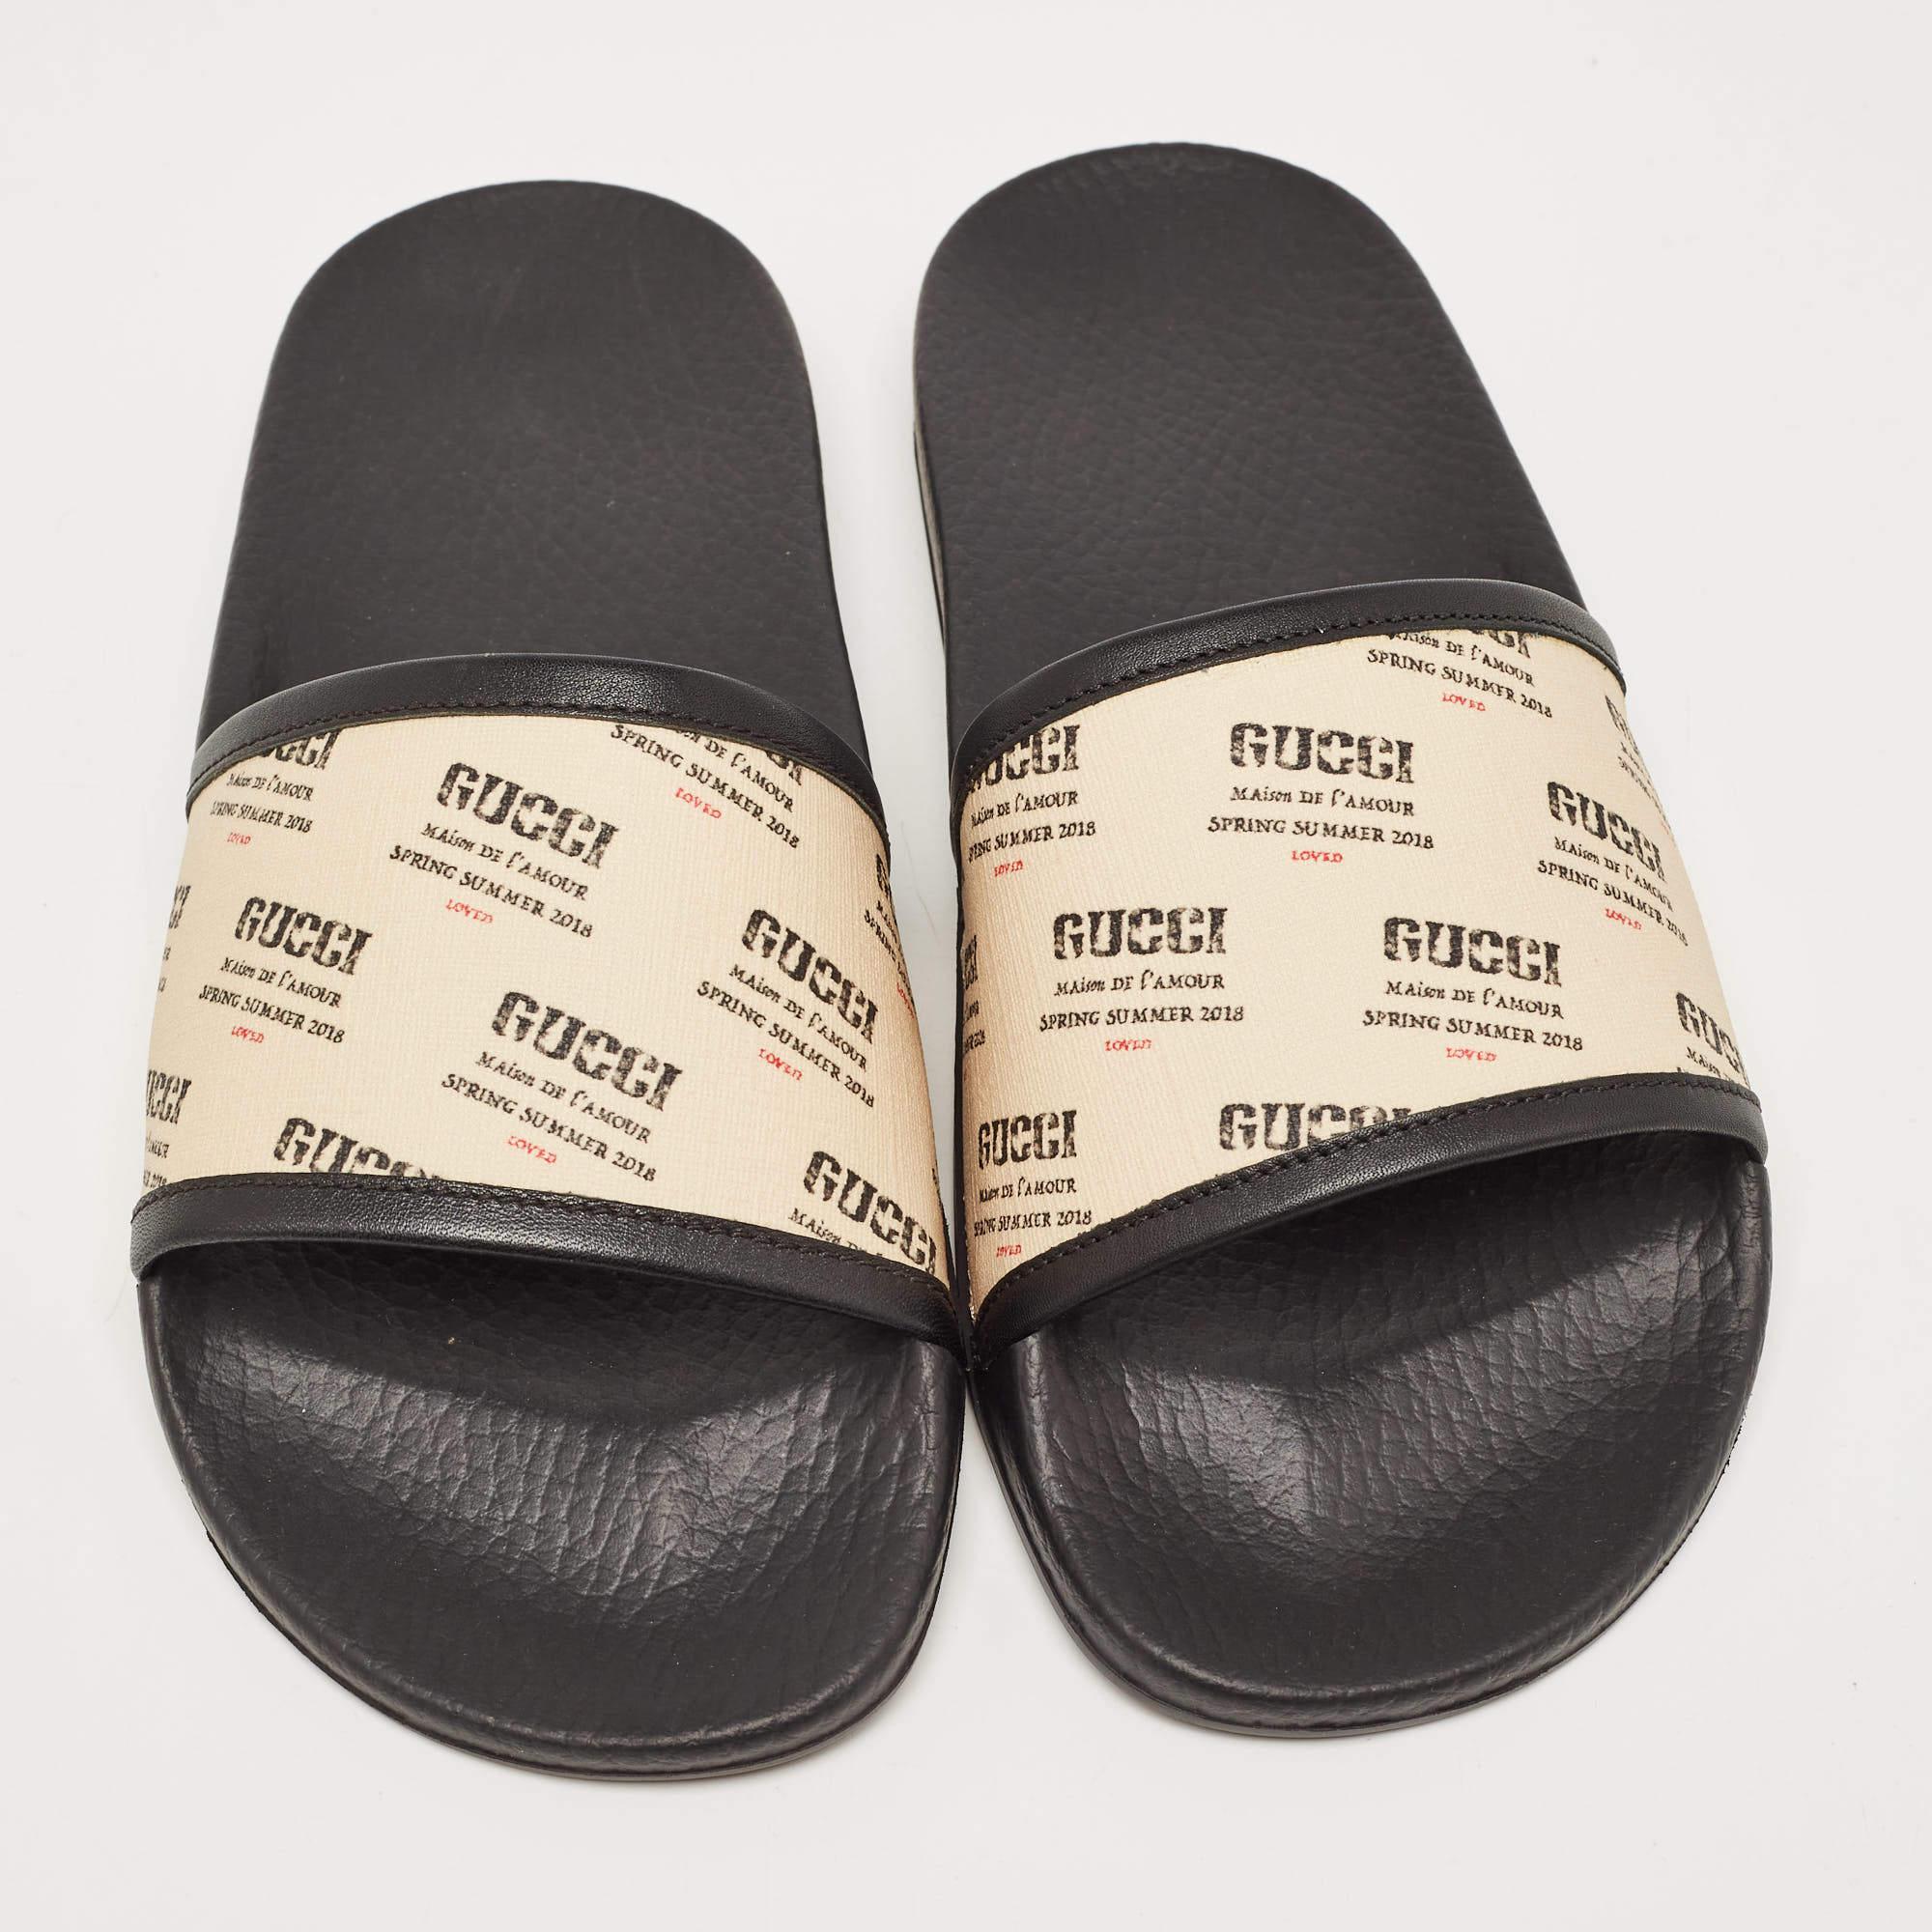 Gucci's rubber slides for women have stamp prints on the coated canvas uppers. They're perfect for the beach, vacation days, or everyday use.

Includes: Original Dustbag, Original Box

